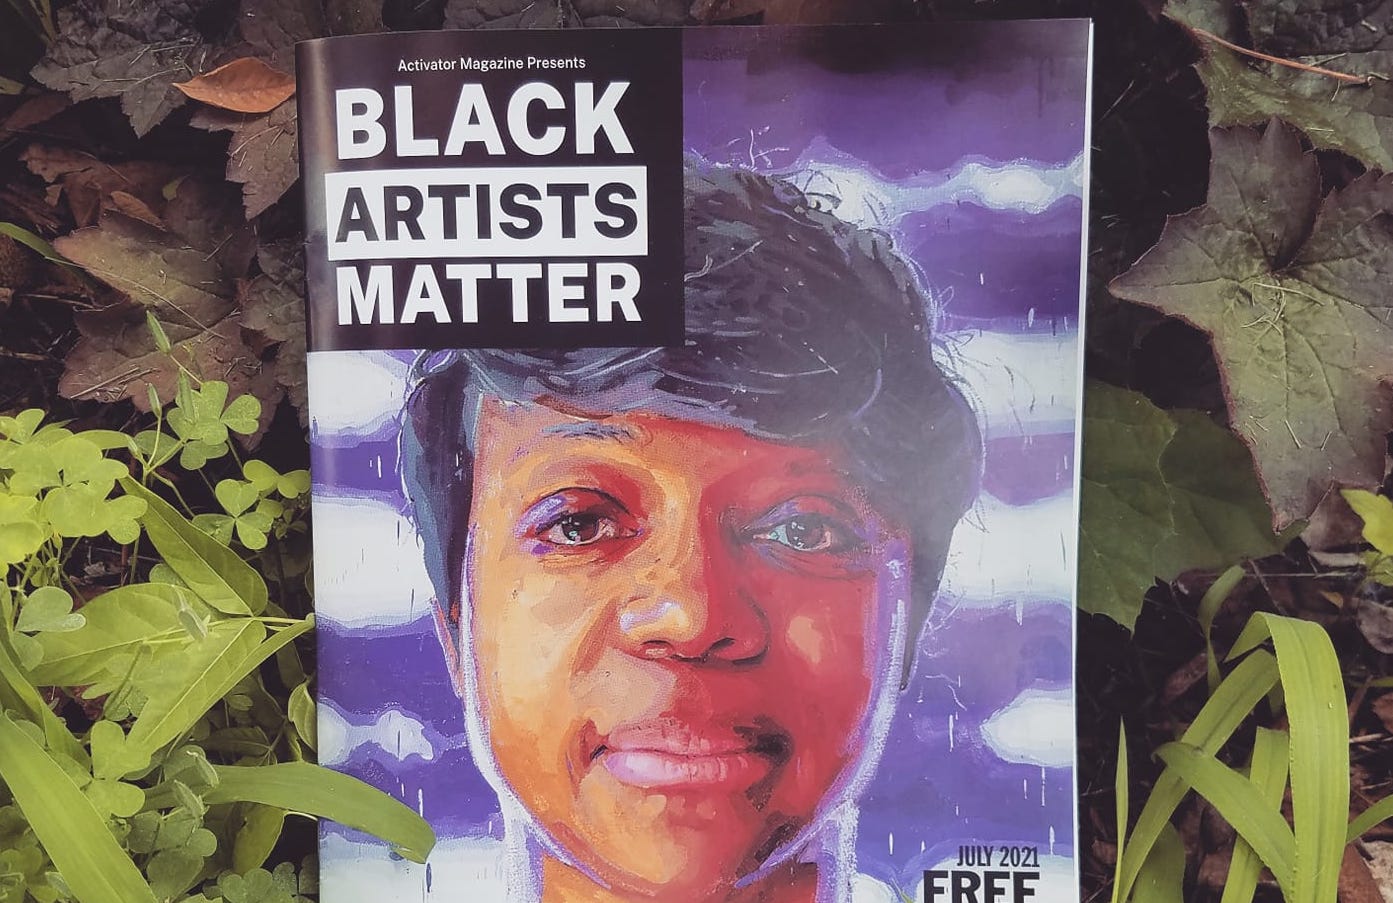 The July 2021 issue of Activator Magazine is a Black Artists Matter issue. The cover features an in-color print of a portrait of Endalyn Taylor by Patrick Earl Hammie. It is a Black woman viewed straight on. She has short, dark hair and looks out at the viewer. The background is purple and white, and there is purple reflected on her face. The magazine is propped up in some grass and leaves.